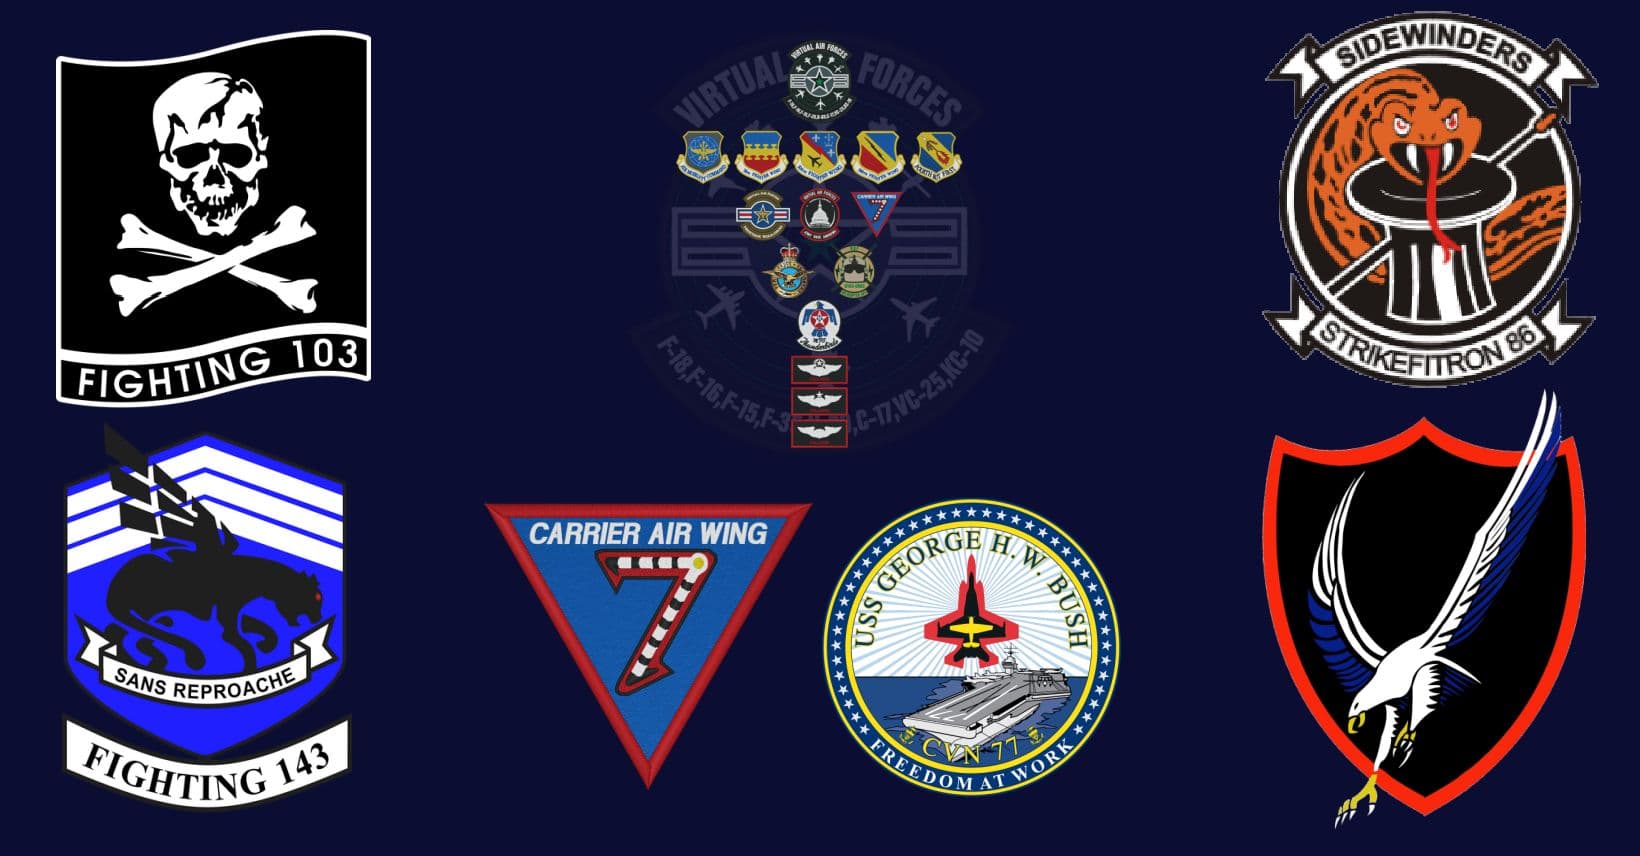 Carrier Air Wing 9